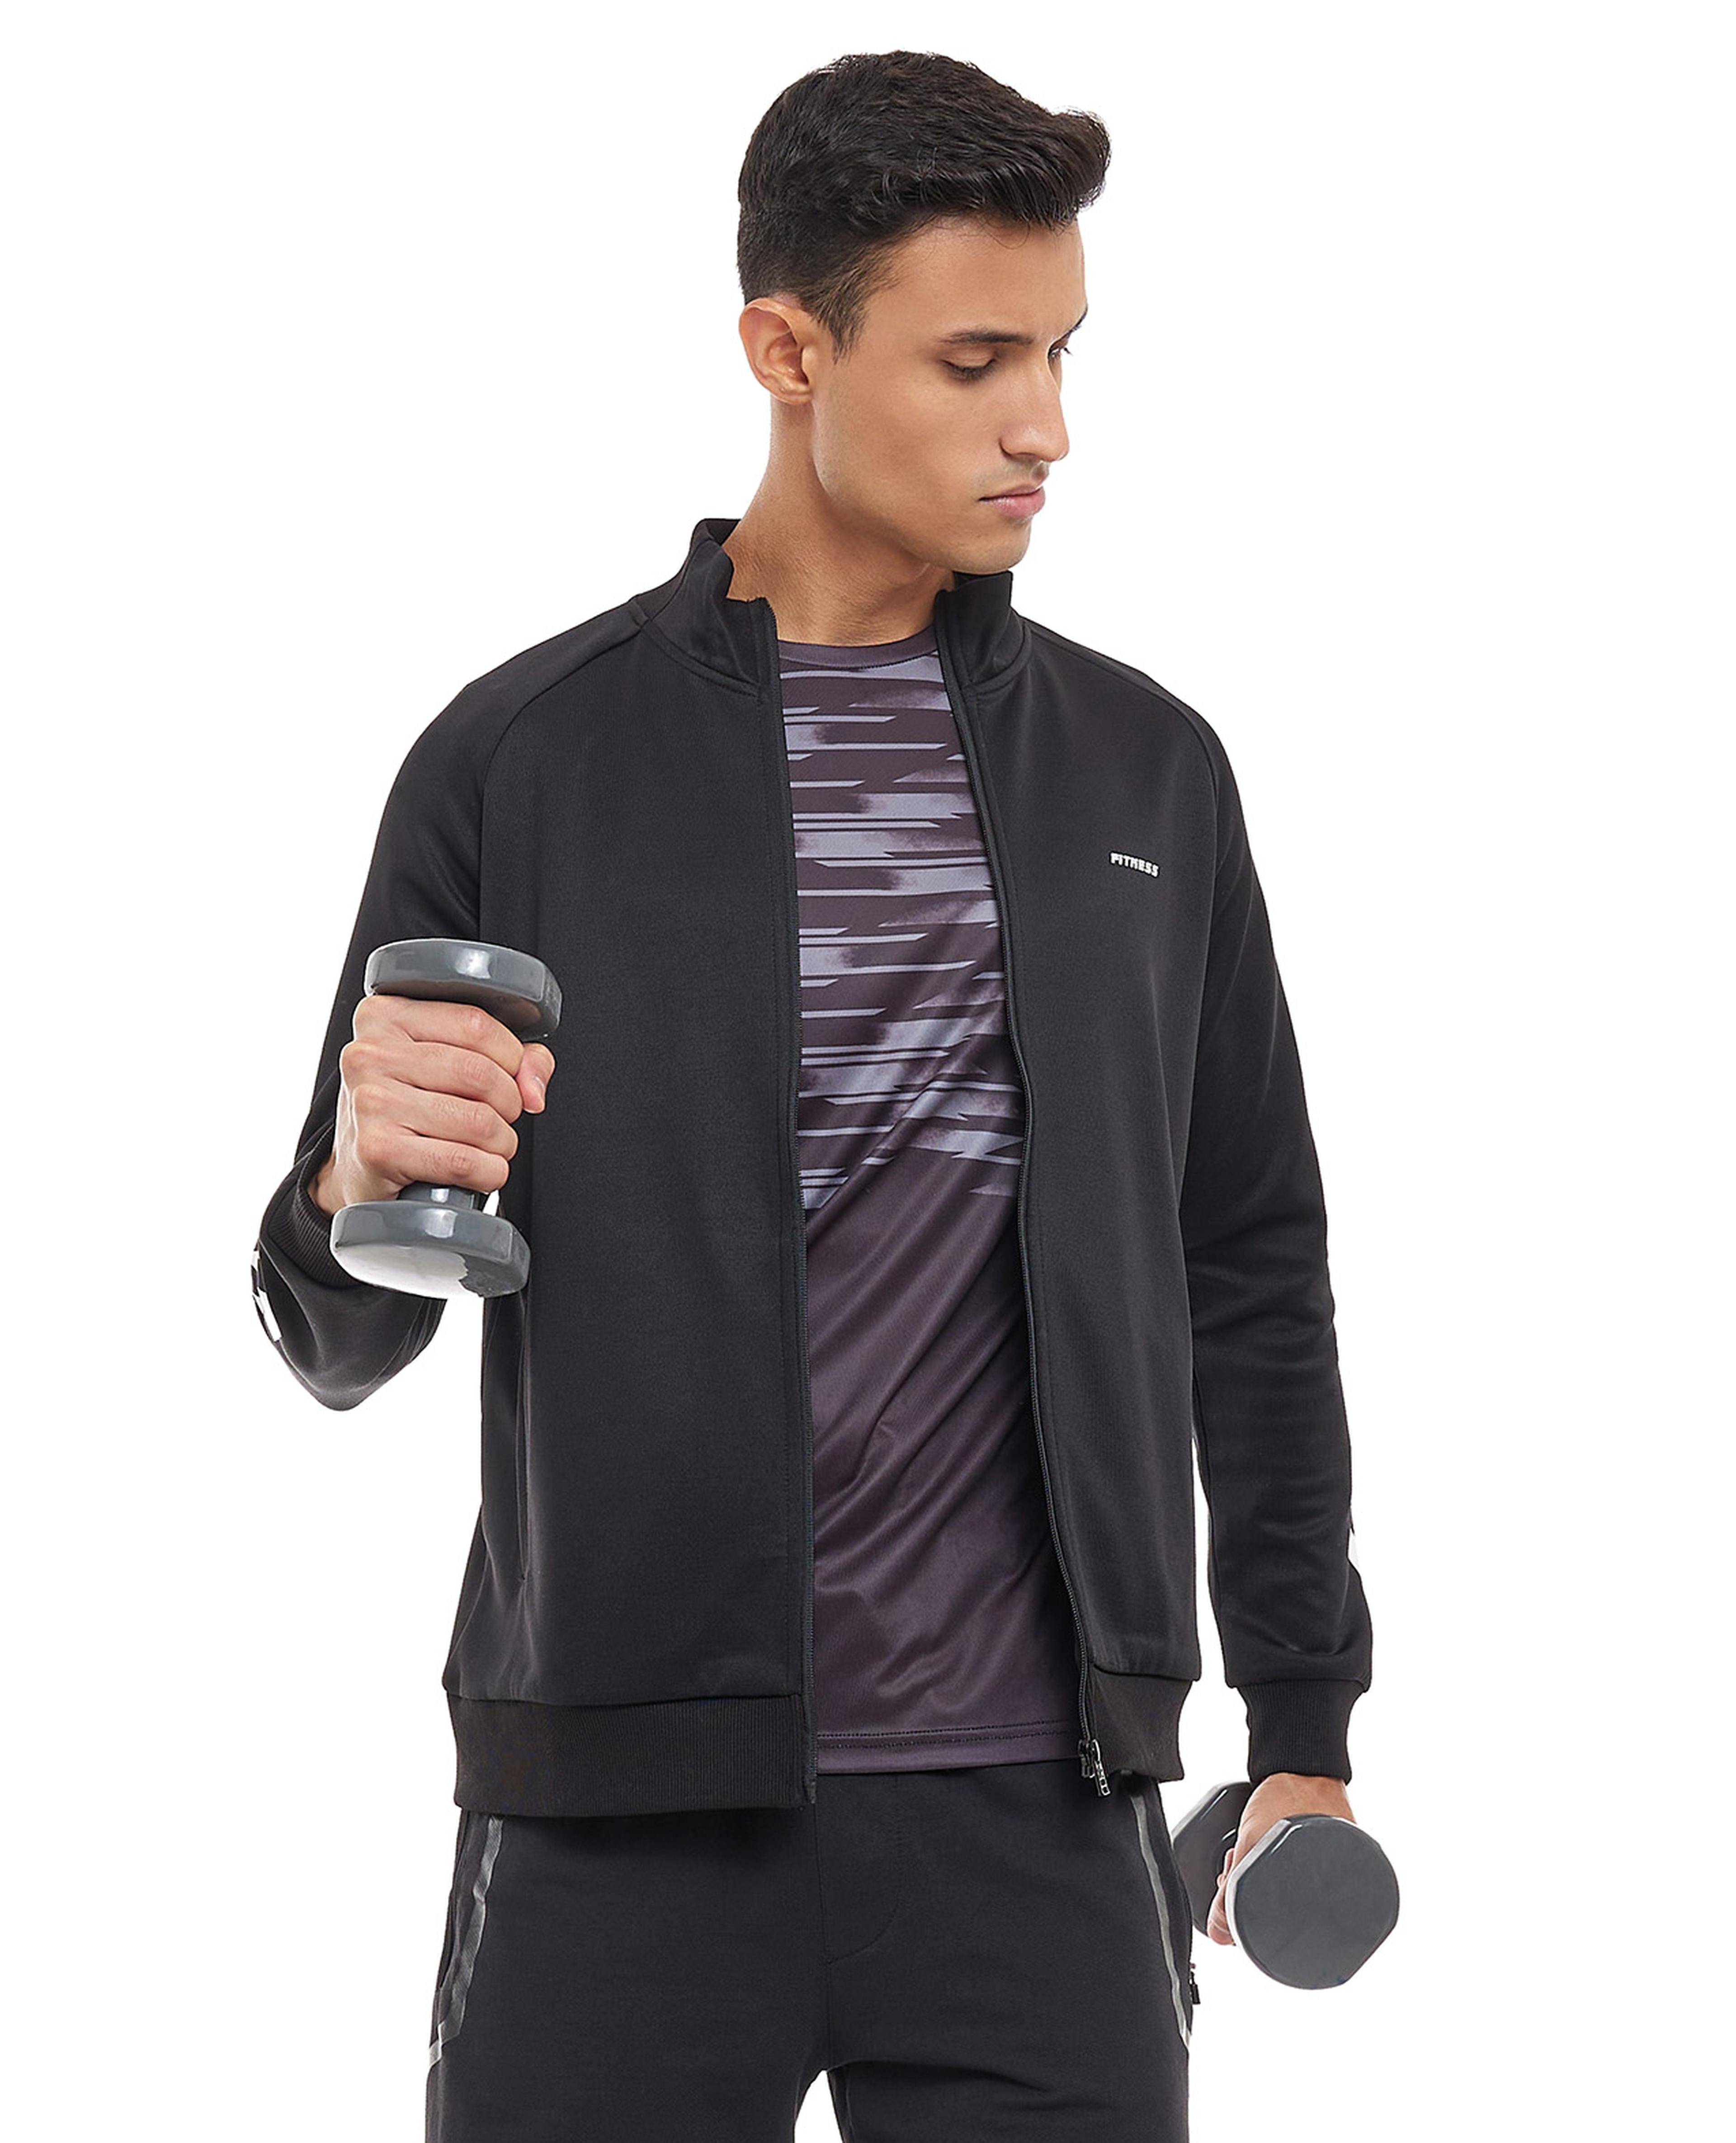 Solid Active Jacket with Zipper Closure